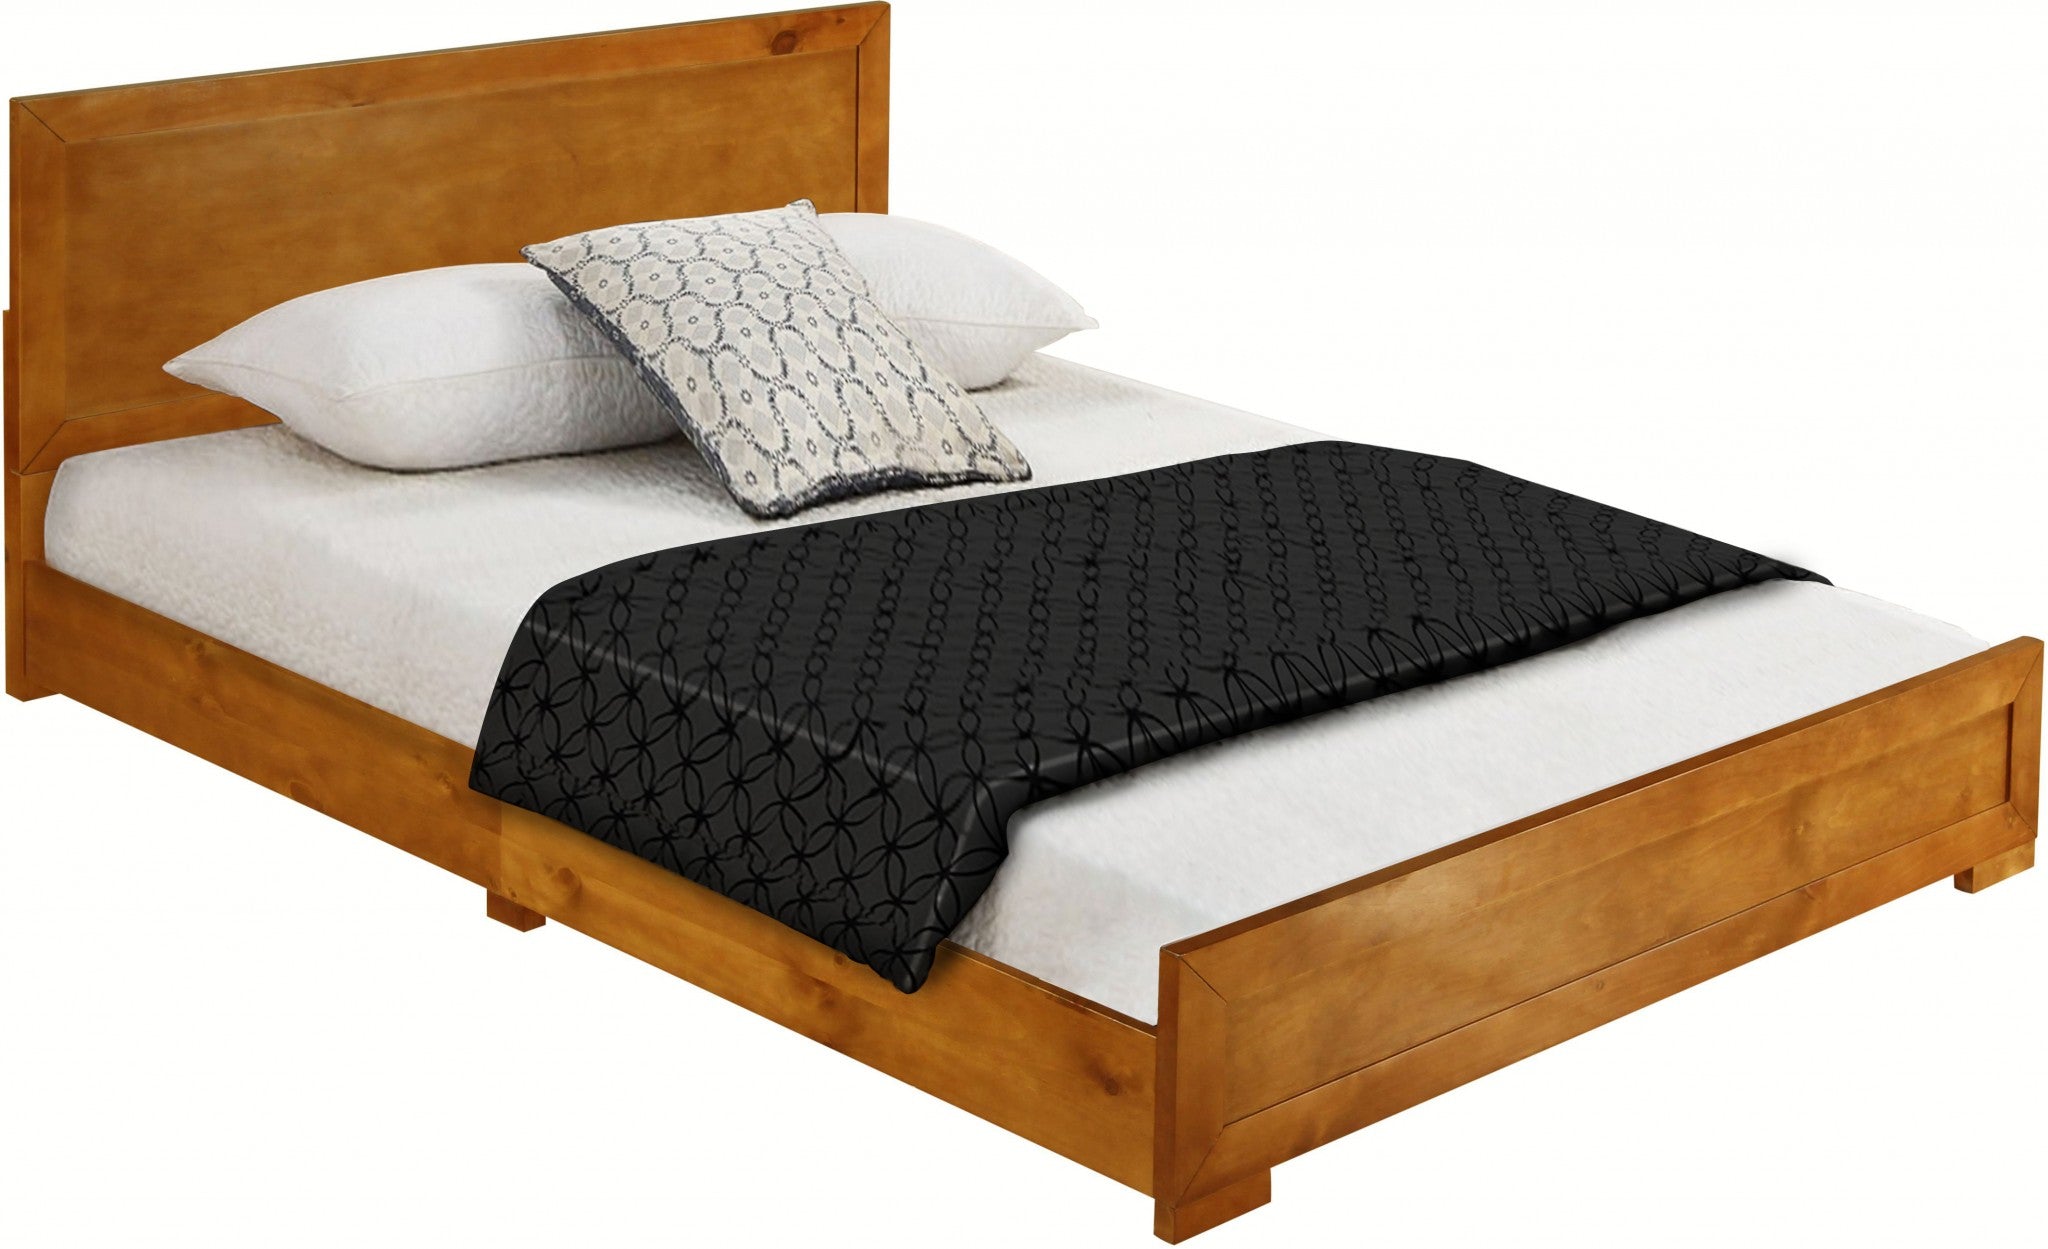 Moma Oak Wood Platform Full Bed With Nightstand